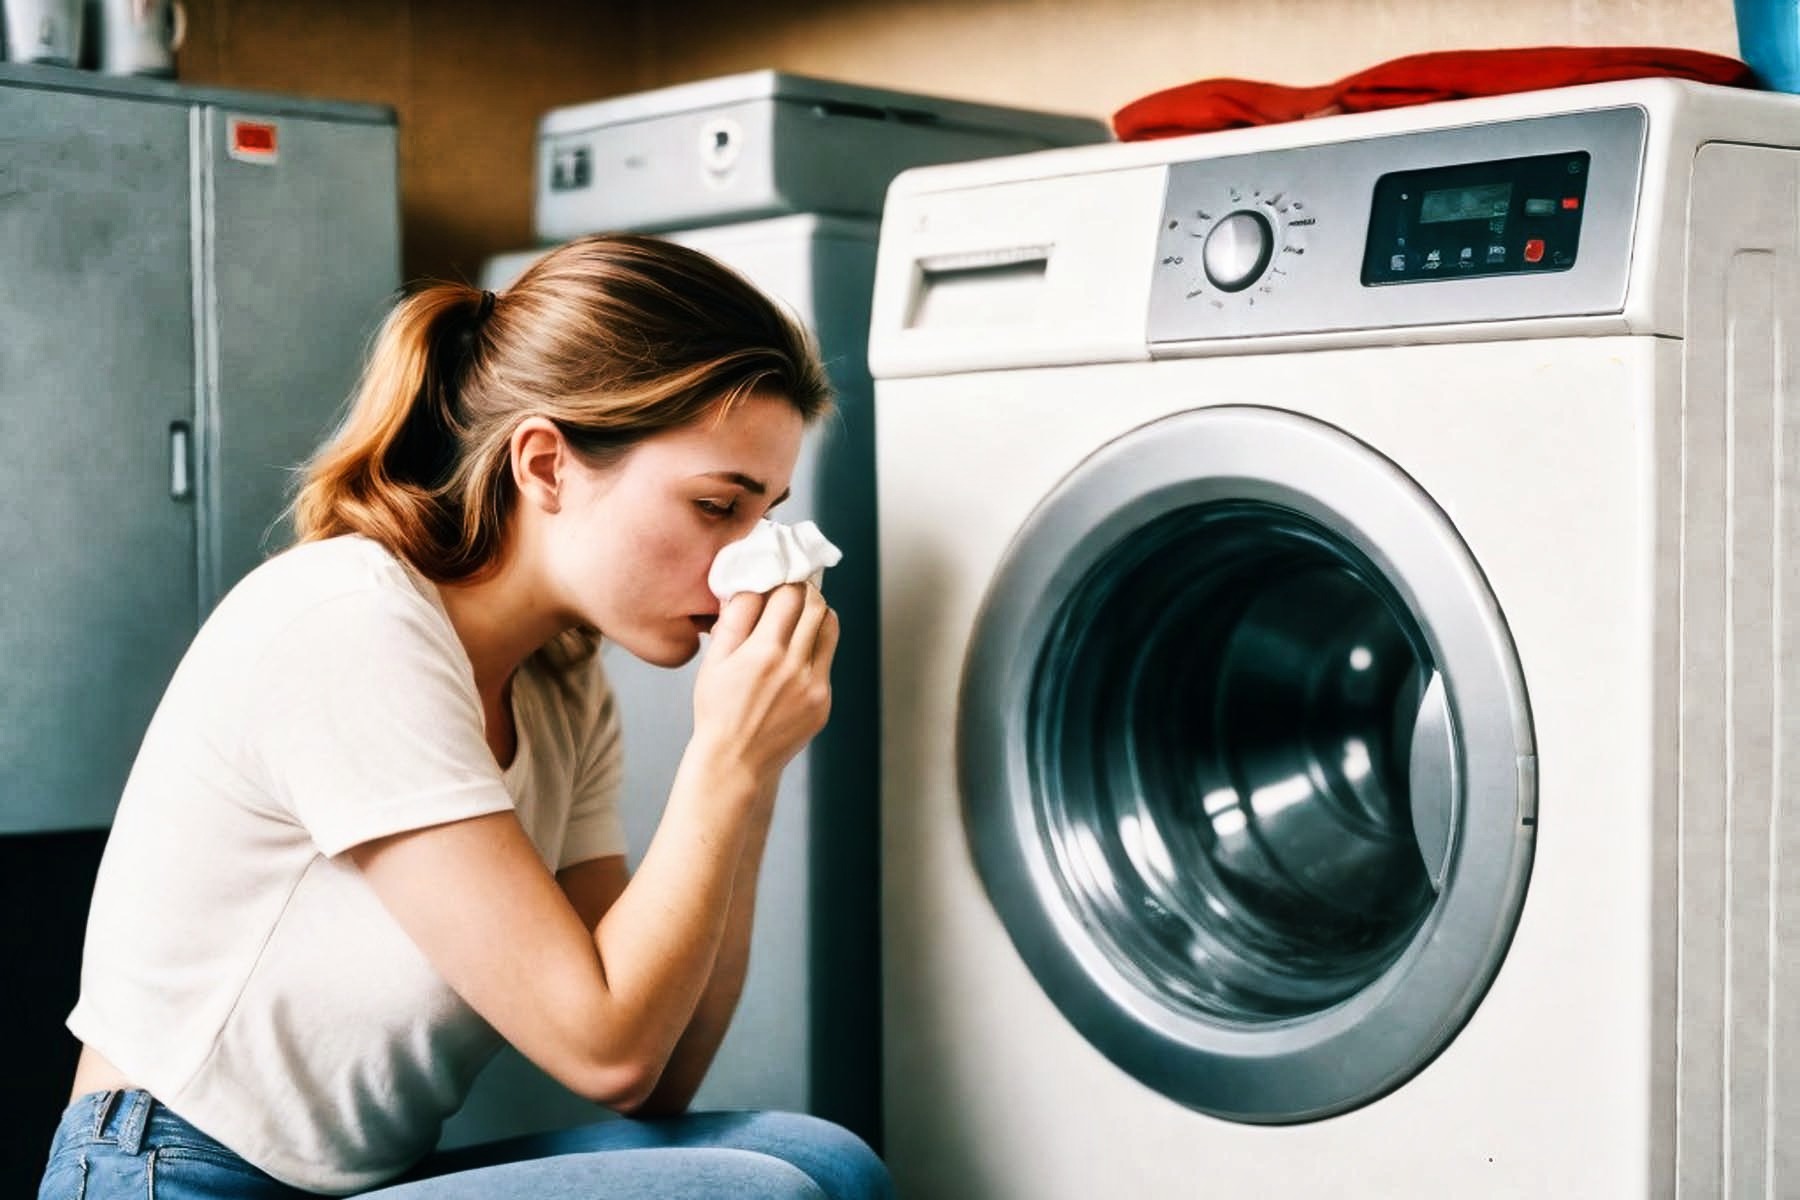 Expert Speed Queen Washer Dryer Repair Services for Austin Apartments and Condos